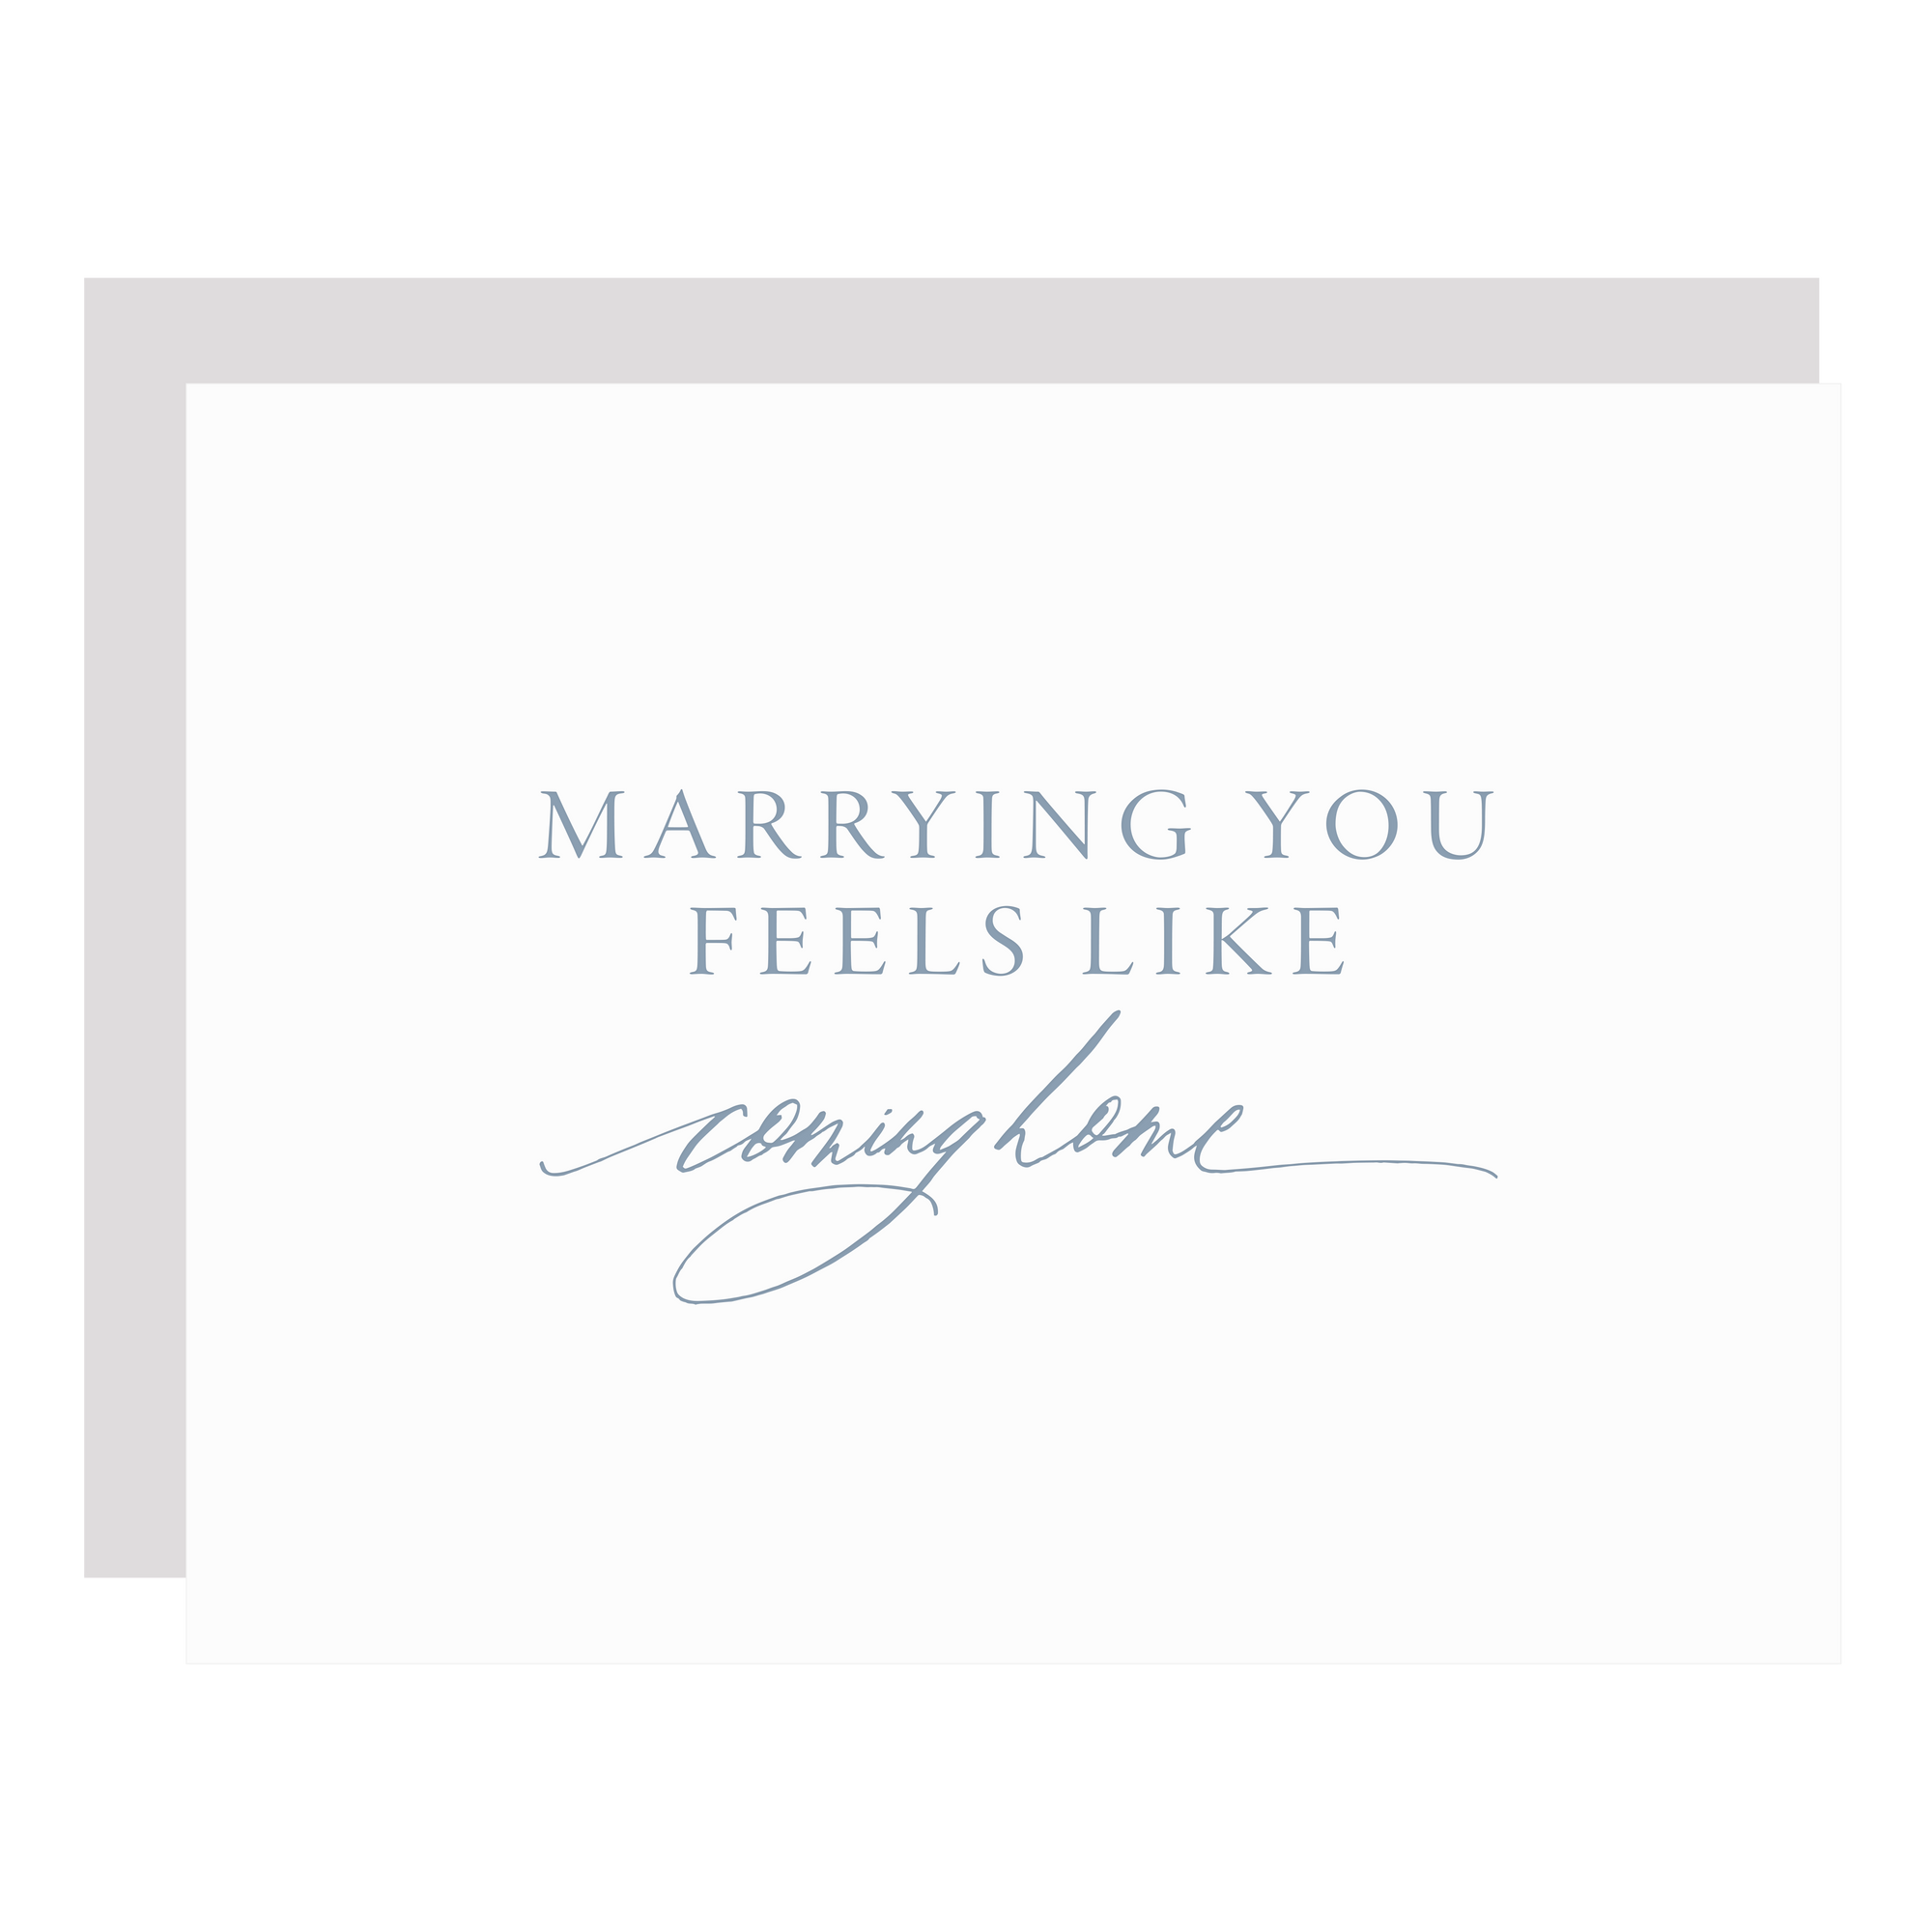 "Marrying You Feels Like Coming Home" card, letterpress printed by hand in dusty blue ink.